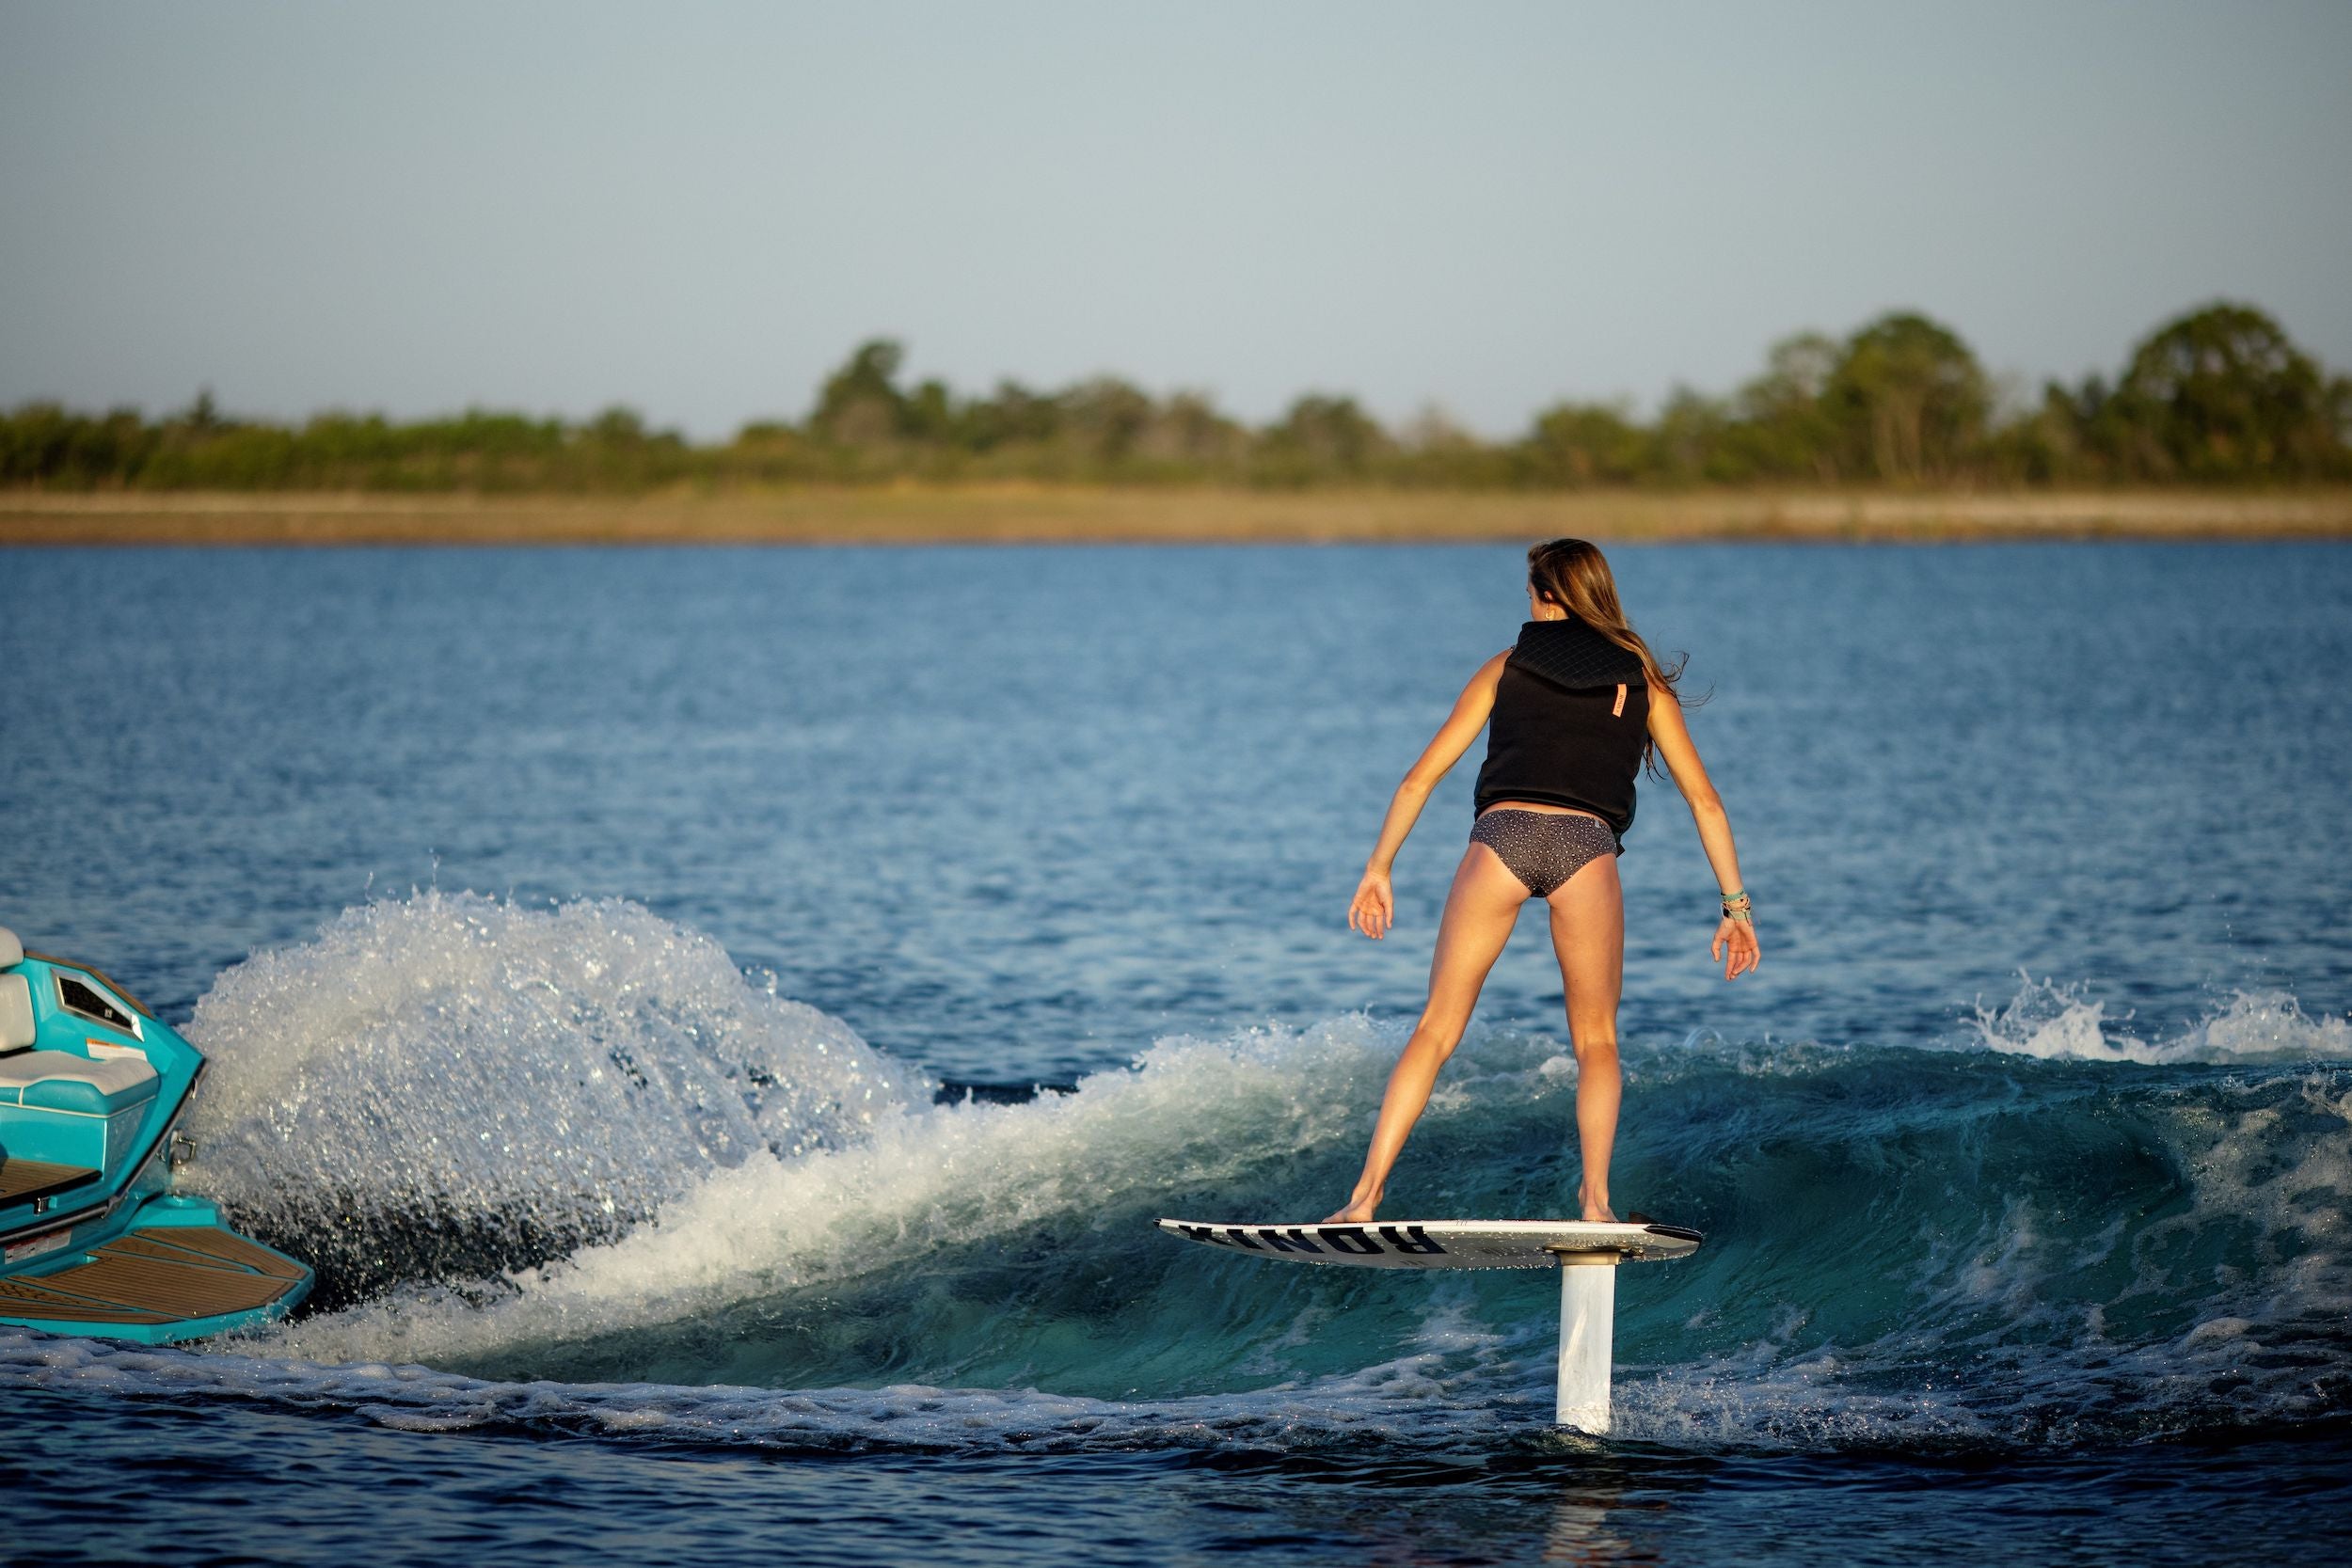 A woman is standing on a surfboard in the water, confidently showcasing the water-resistant features of the Ronix Women's Imperial Capella 3.0 CGA Vest model.